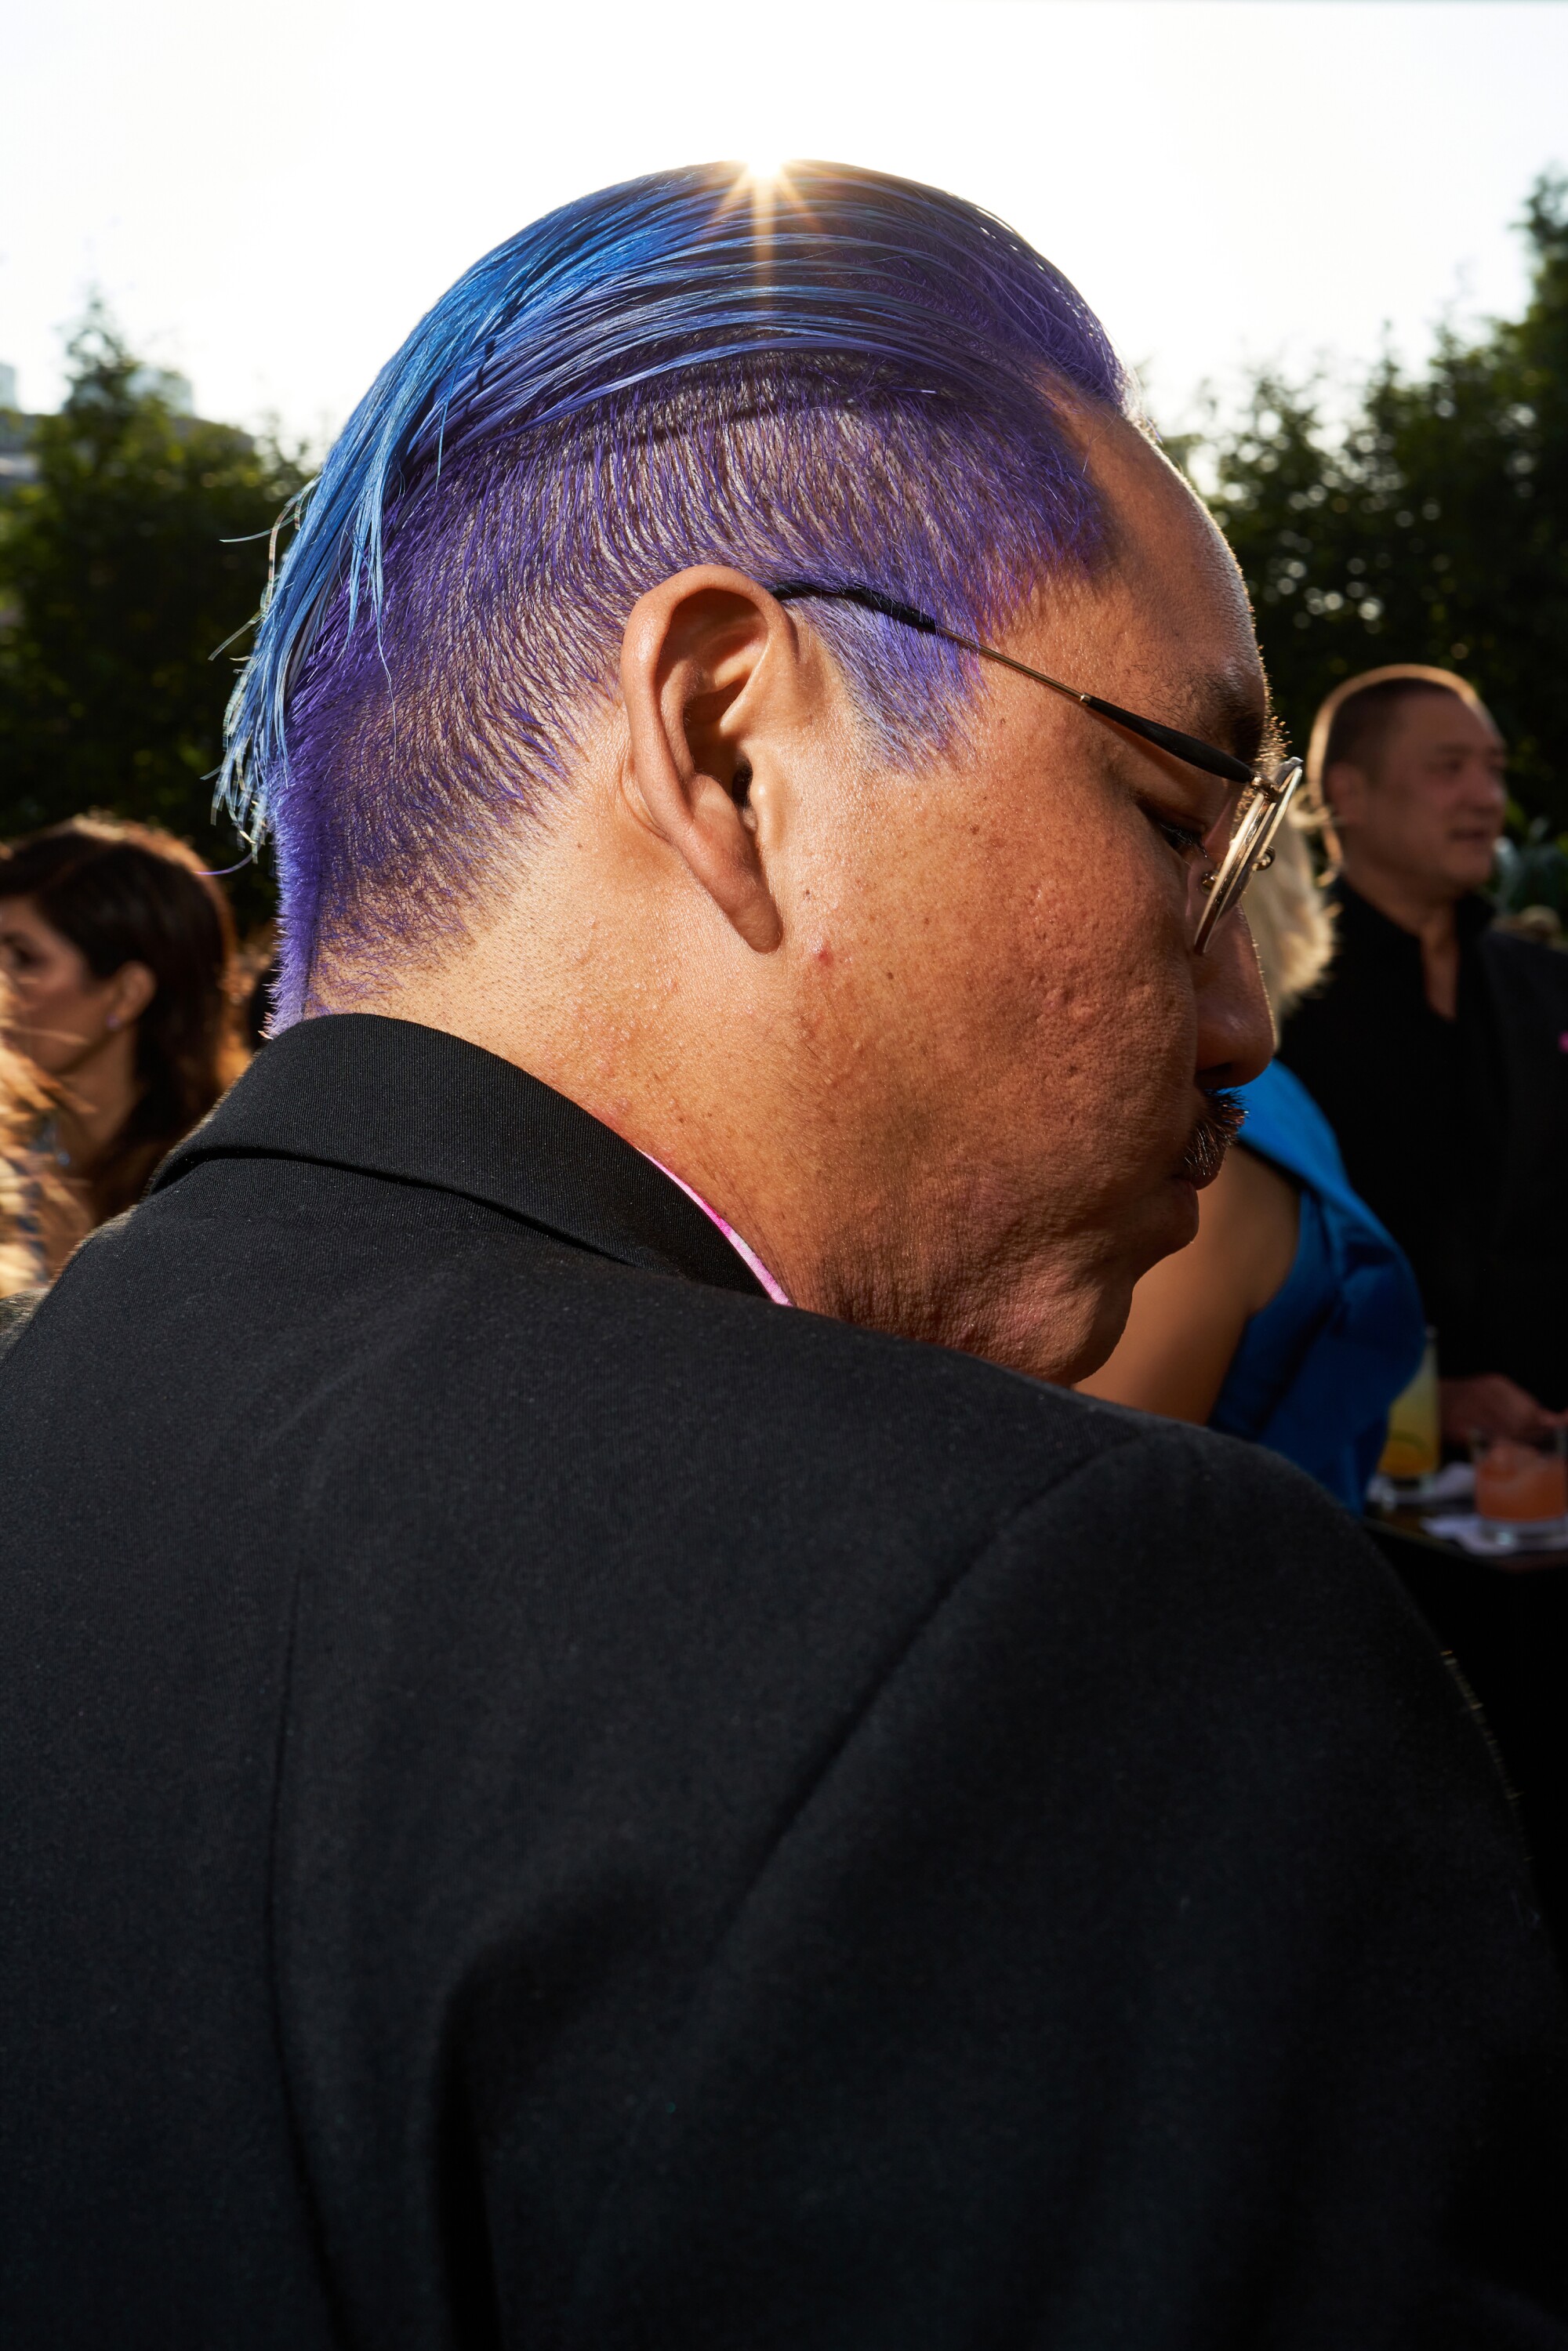 A man, in profile, shows his blue and purple hairstyle to the camera.